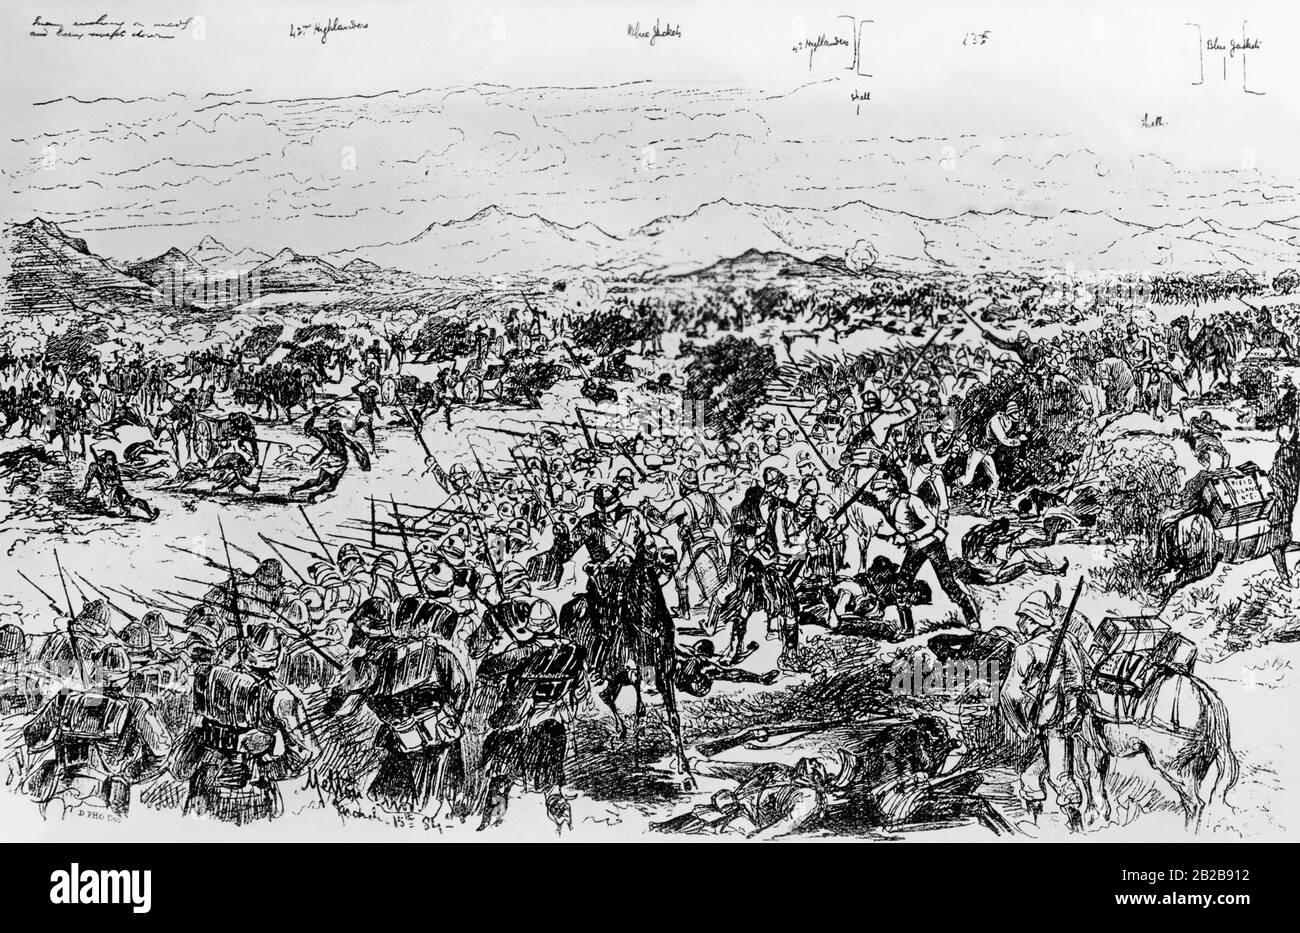 Sketch by Melton Prior showing the battle of the Brits against the Mahdi Army at Tonasi or Tomanieb. The picture shows the recapture of the guns just lost by the ship brigade. The Mahdi Uprising from 1881 to 1898 was a revolt led by Muhammad Ahmad against Anglo-Egyptian rule in the Sudan provinces. It was not until 1898 that the British succeeded in finally smashing the Mahdist State. Stock Photo